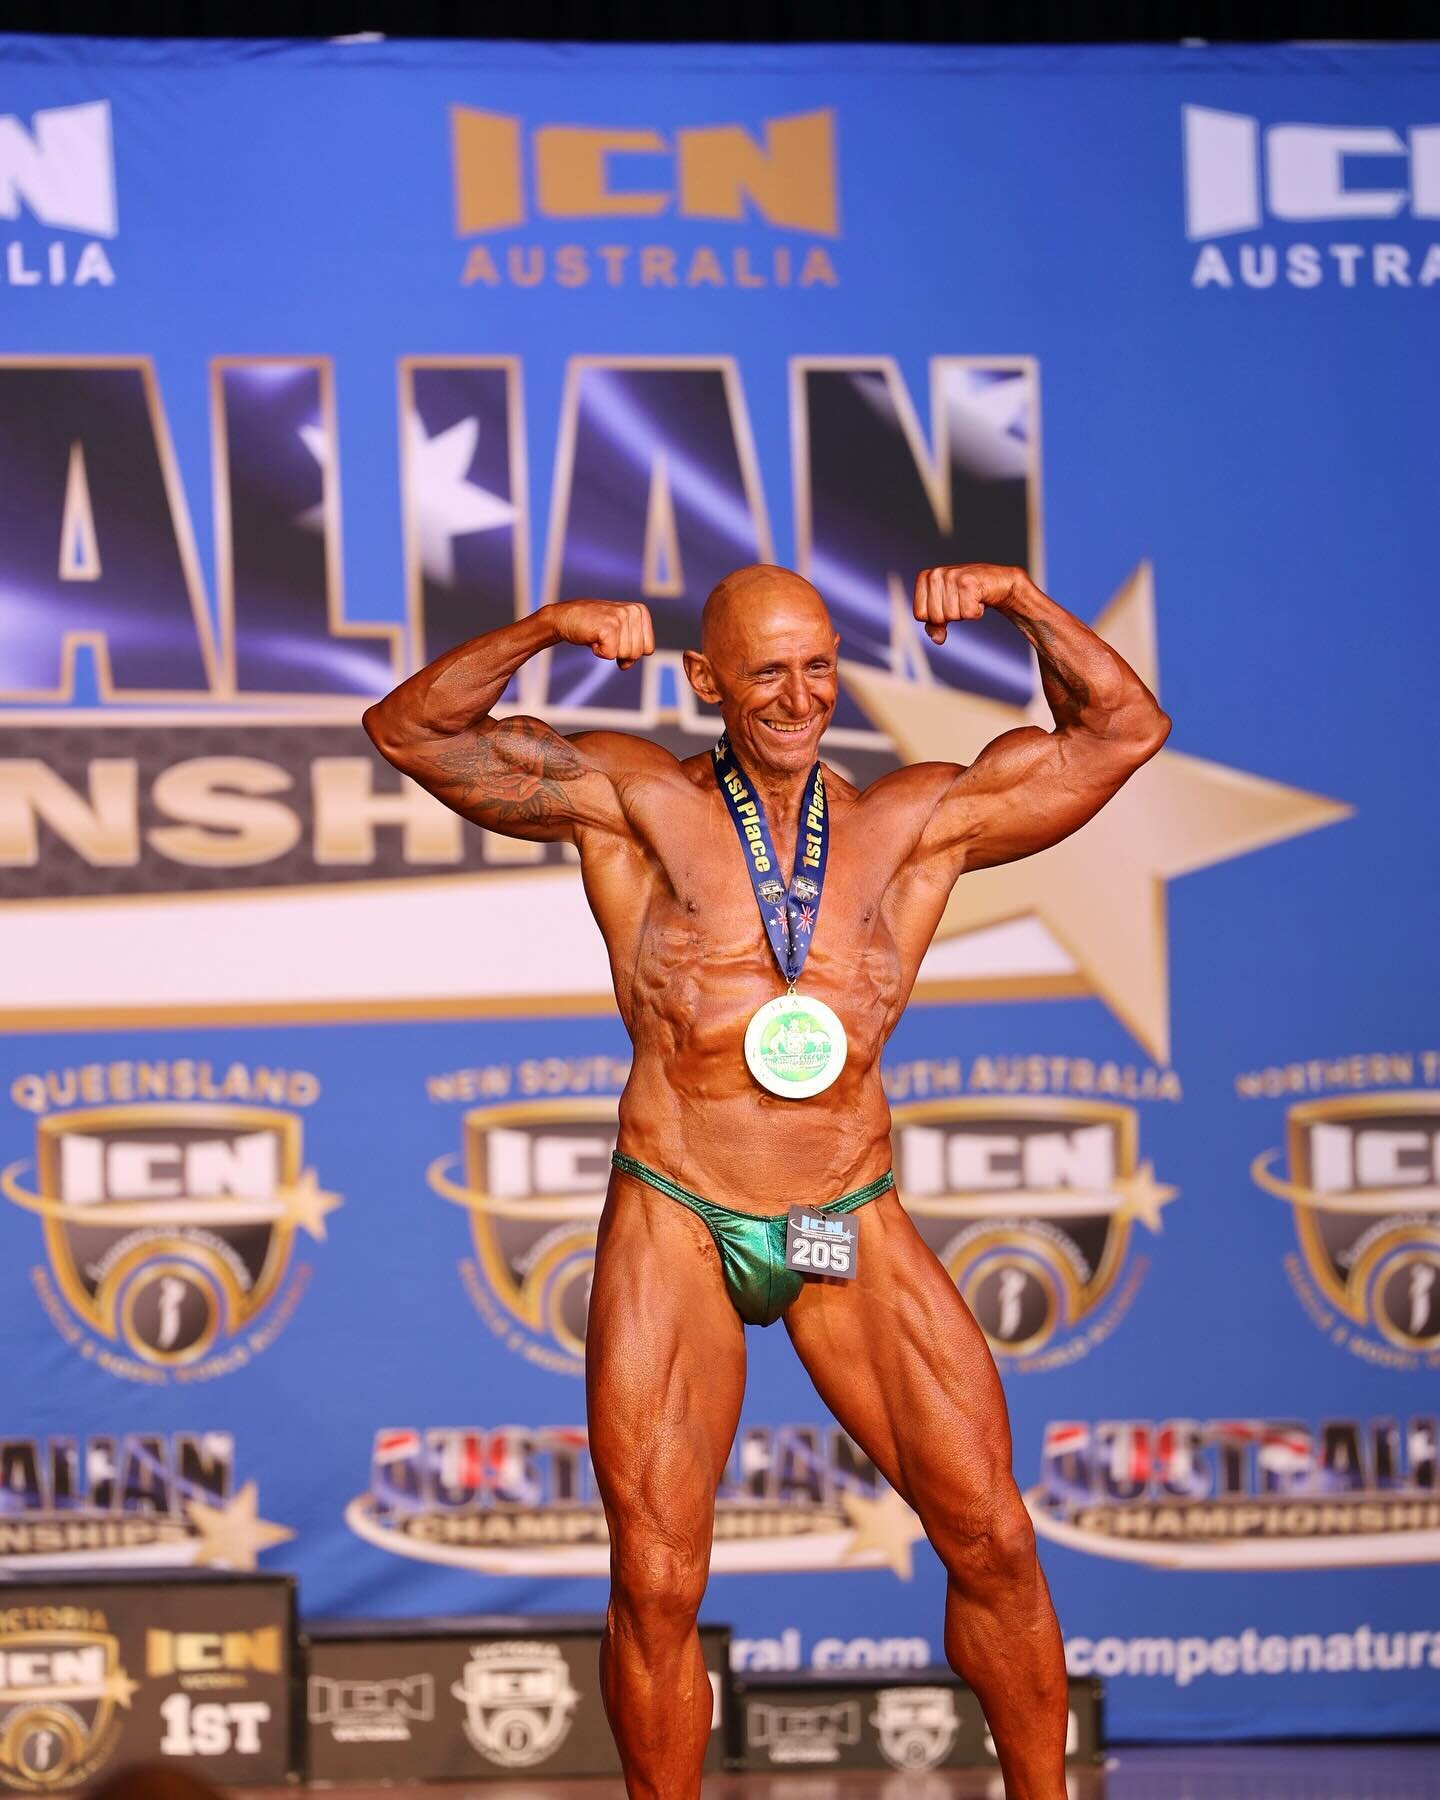 When I stepped up to the bodybuilding stage on the 1st of April 1984 in a regional contest in Gavle Sweden little did I know that 39 years later and at the tender age of 66 years 148 days I&rsquo;d still be flexing my muscles. So here I am yet again 